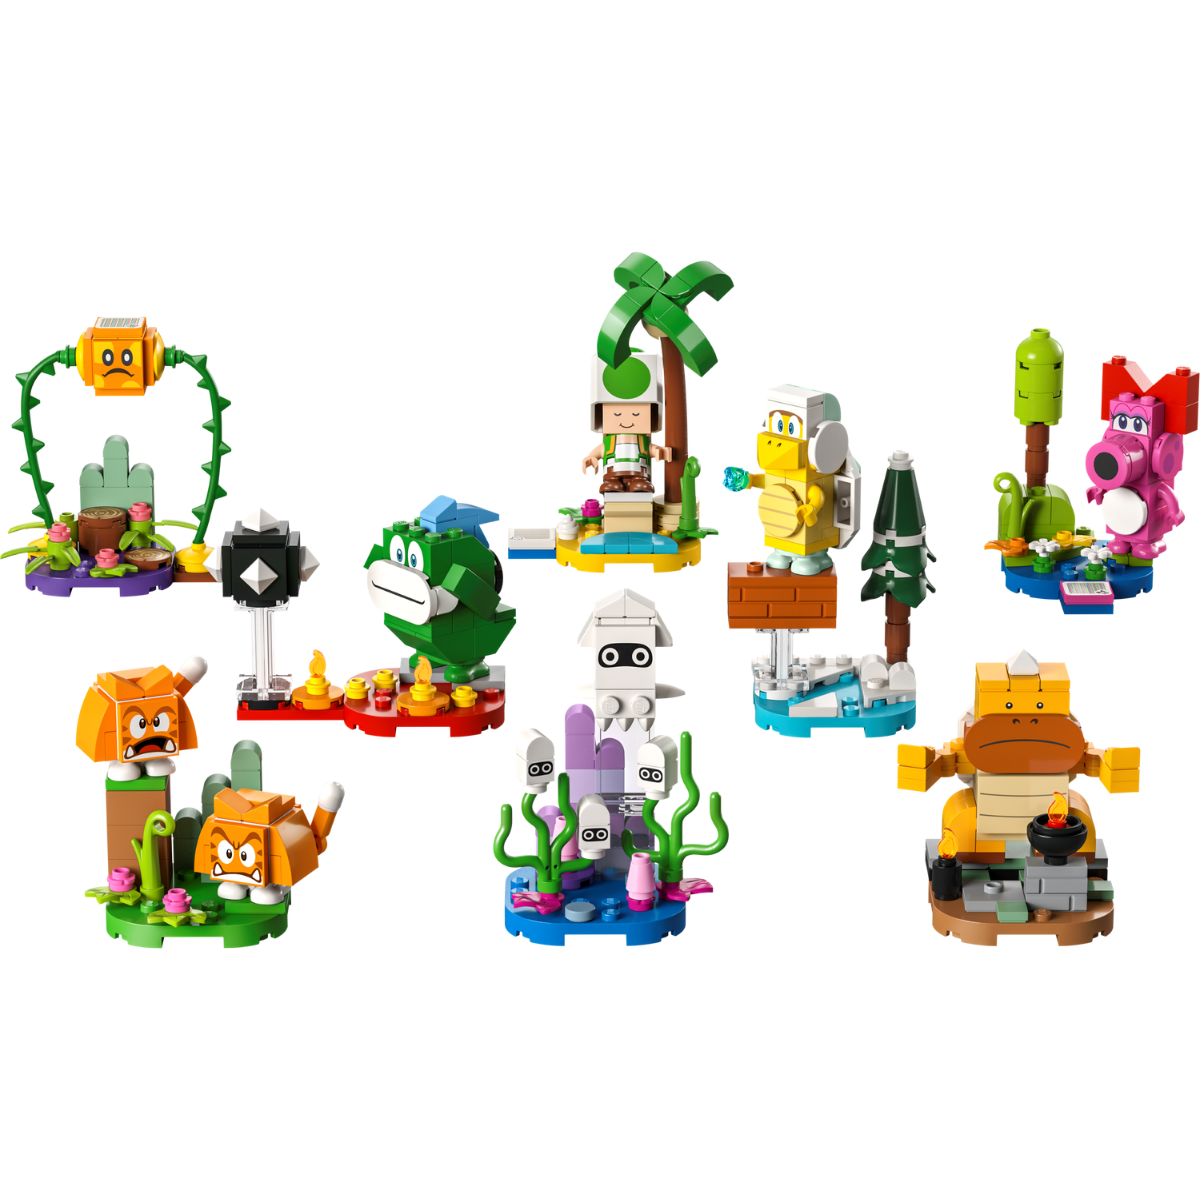 Lego Super Mario 8 to collect series 1 character